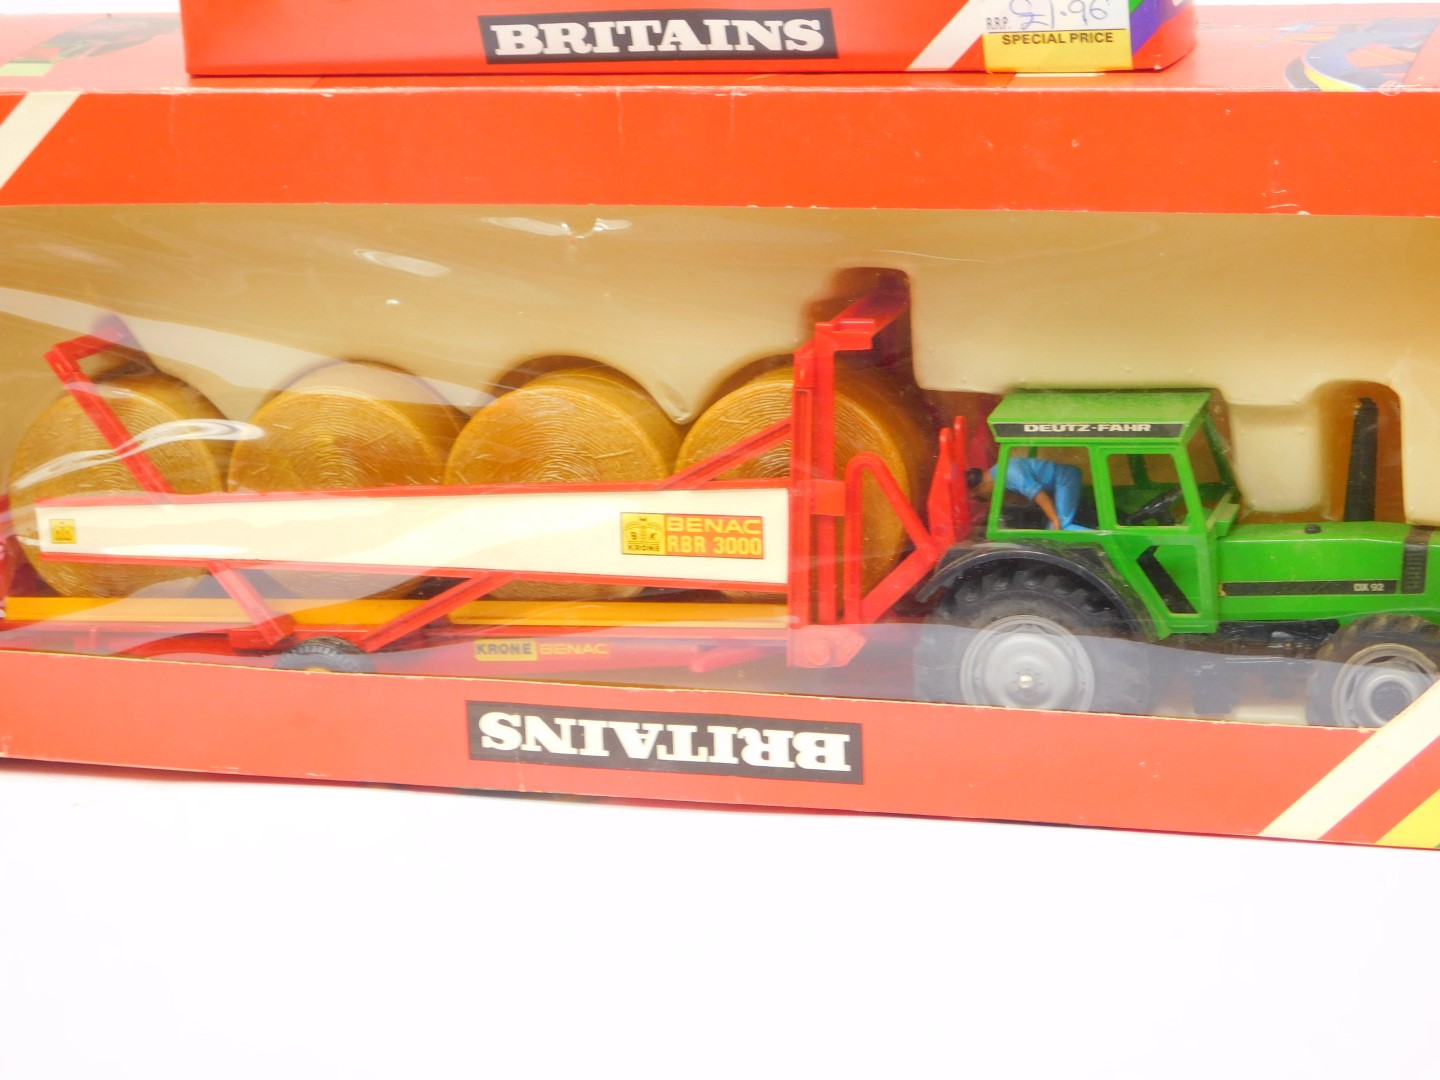 A Britains die cast Dautz-Fahr DX92 tractor with bale transporter, 9602, and a round bales set 1743, - Image 2 of 2